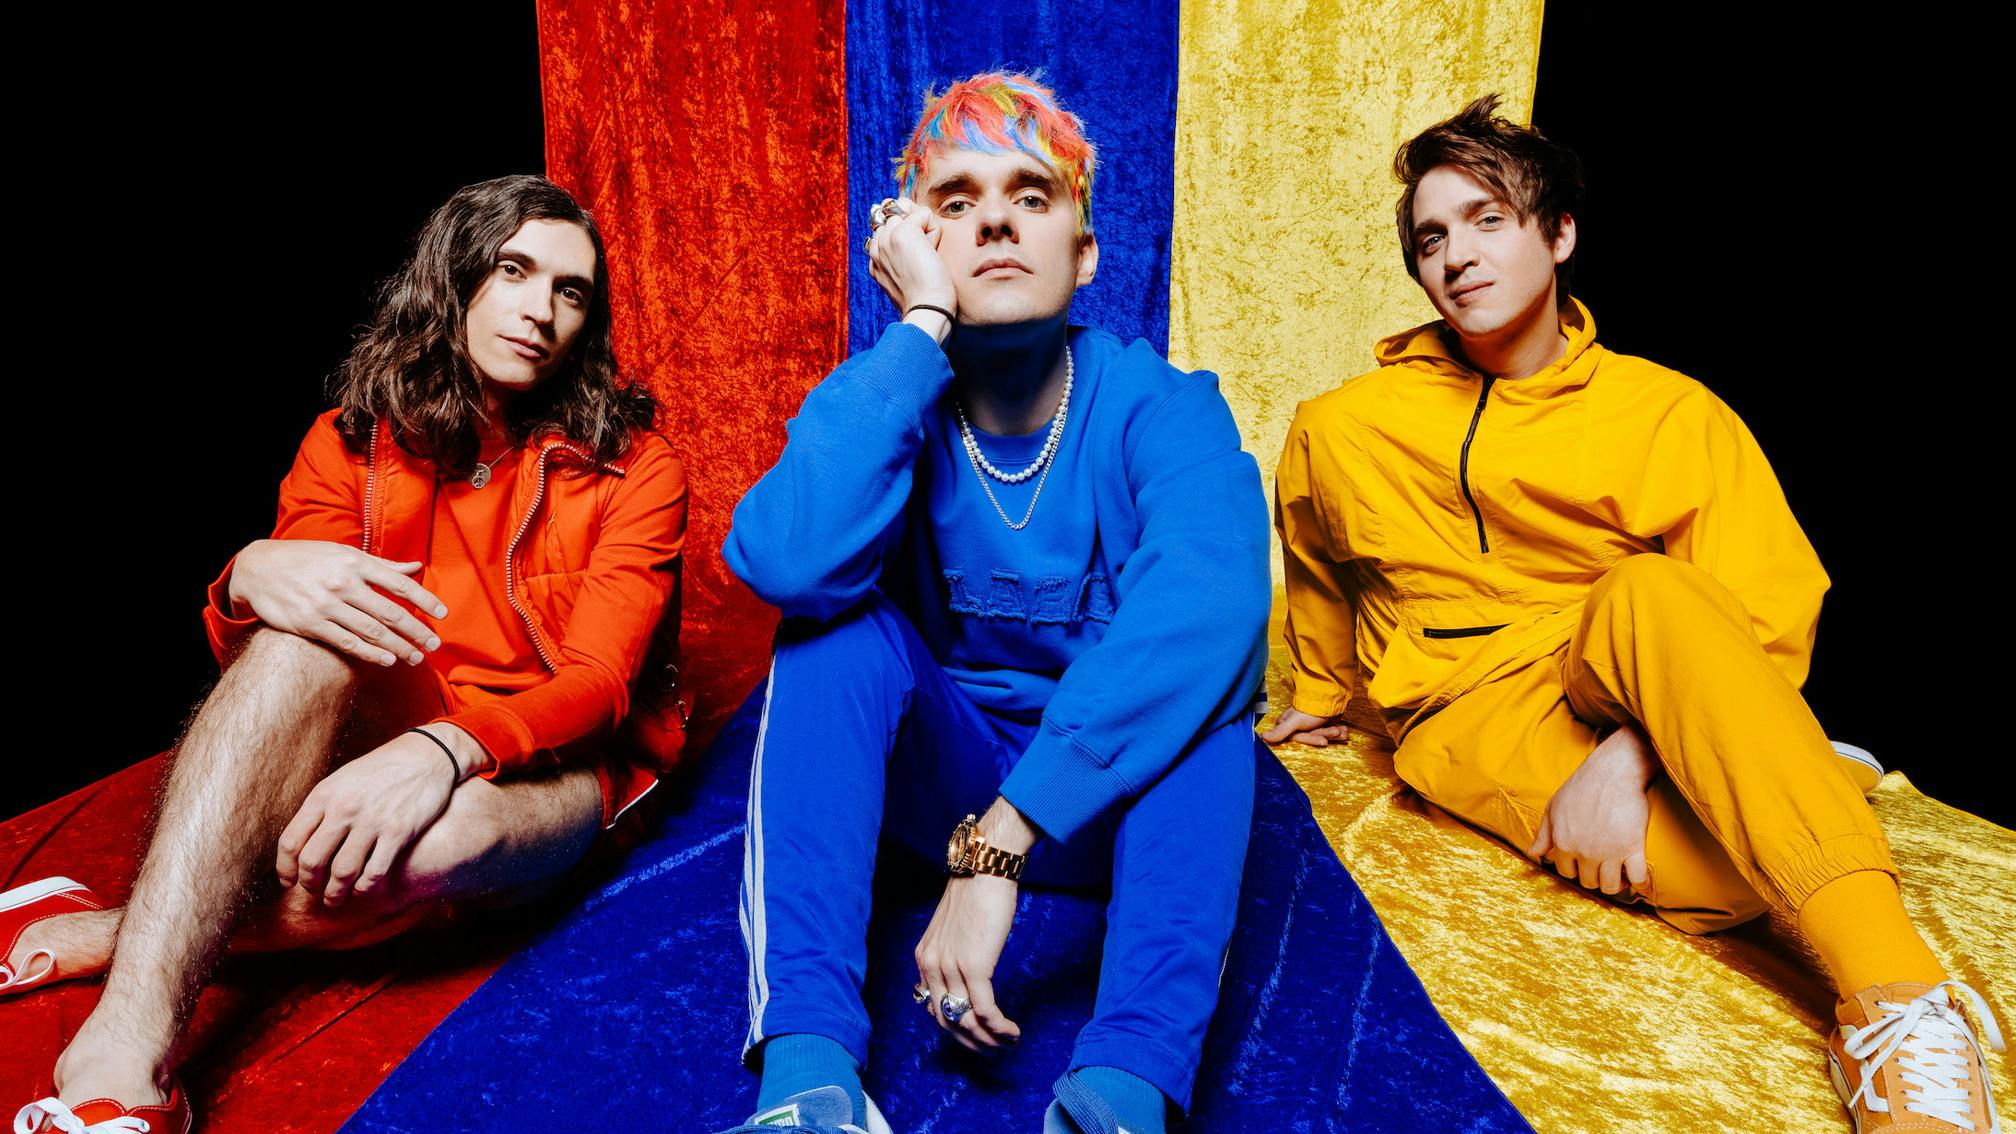 Waterparks announce UK album release shows